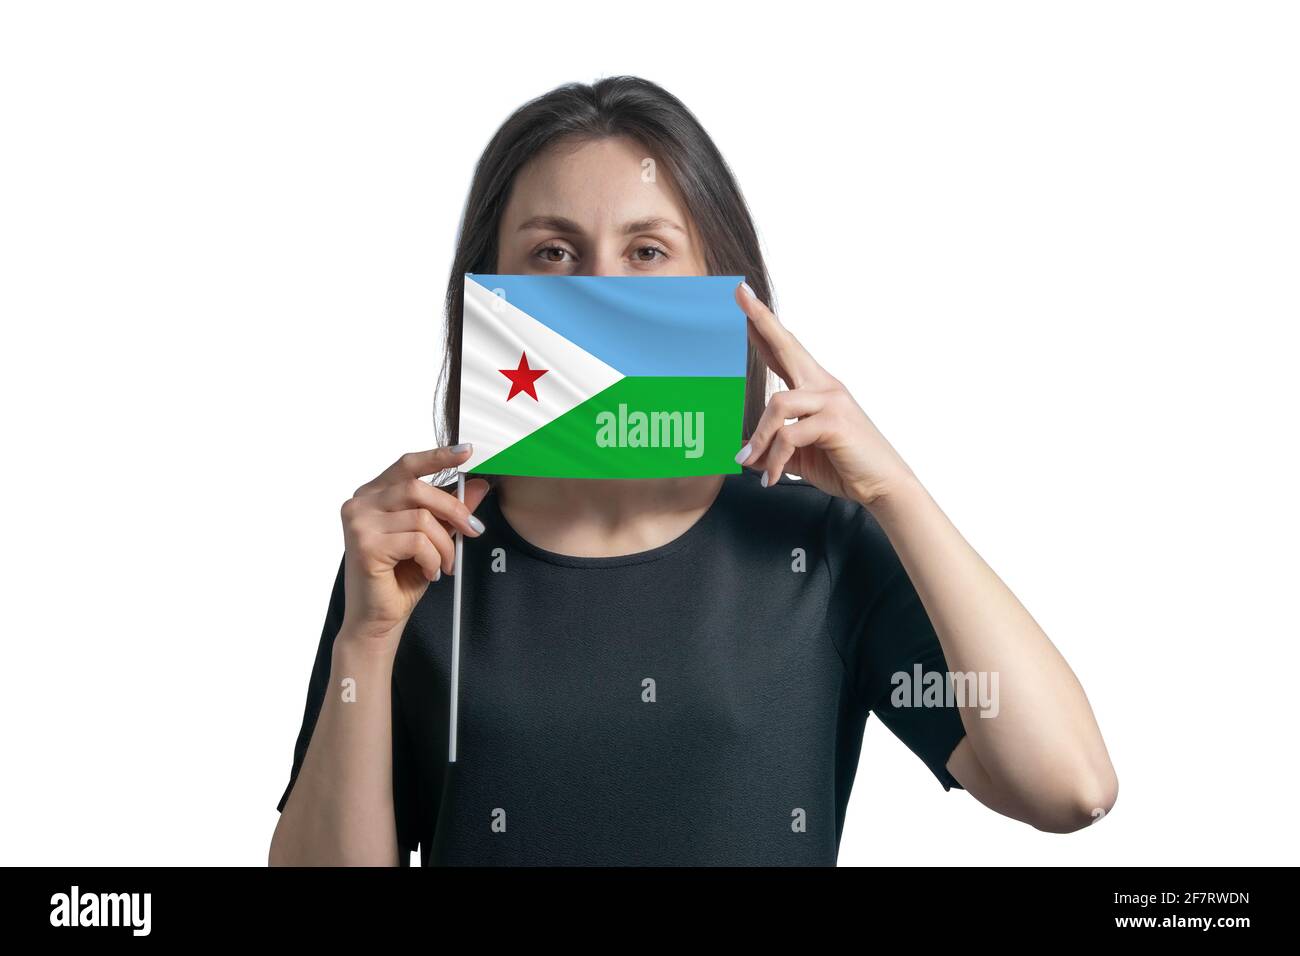 Happy young white woman holding flag Djibouti flag and covers her face with it isolated on a white background. Stock Photo